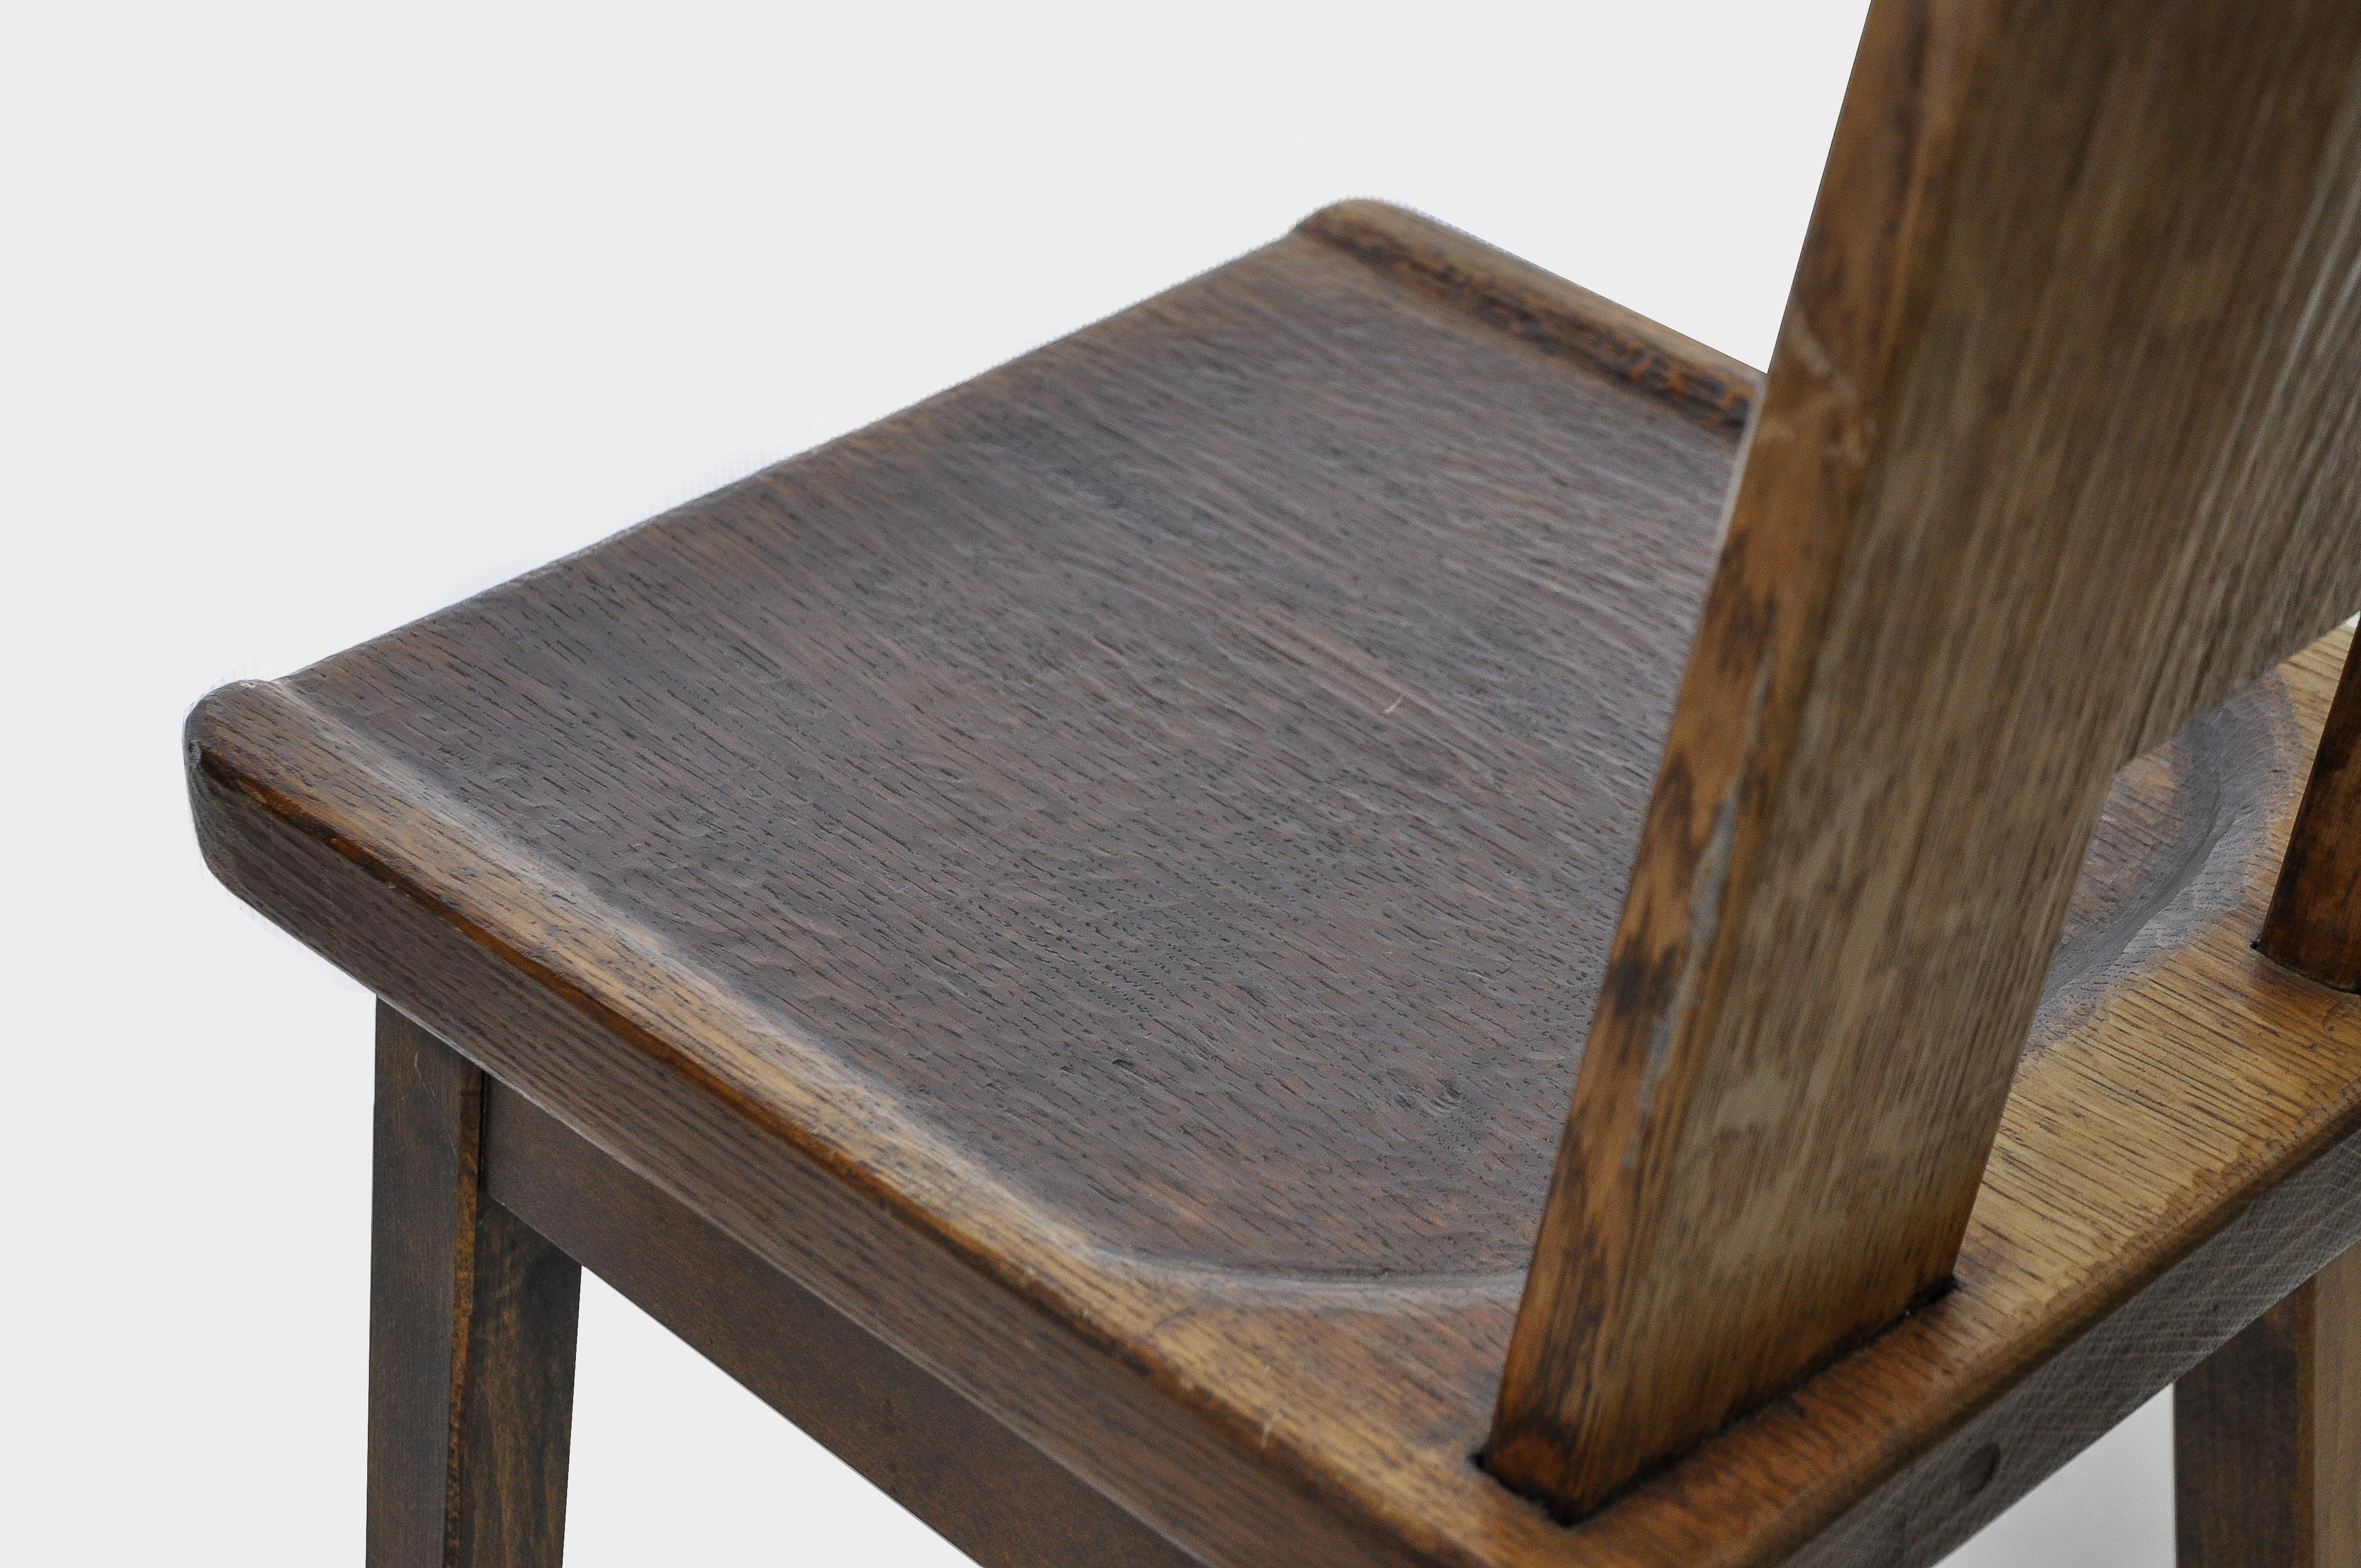 Swiss Hand Carved, Brutalistic Chairs Made of Solid Oak